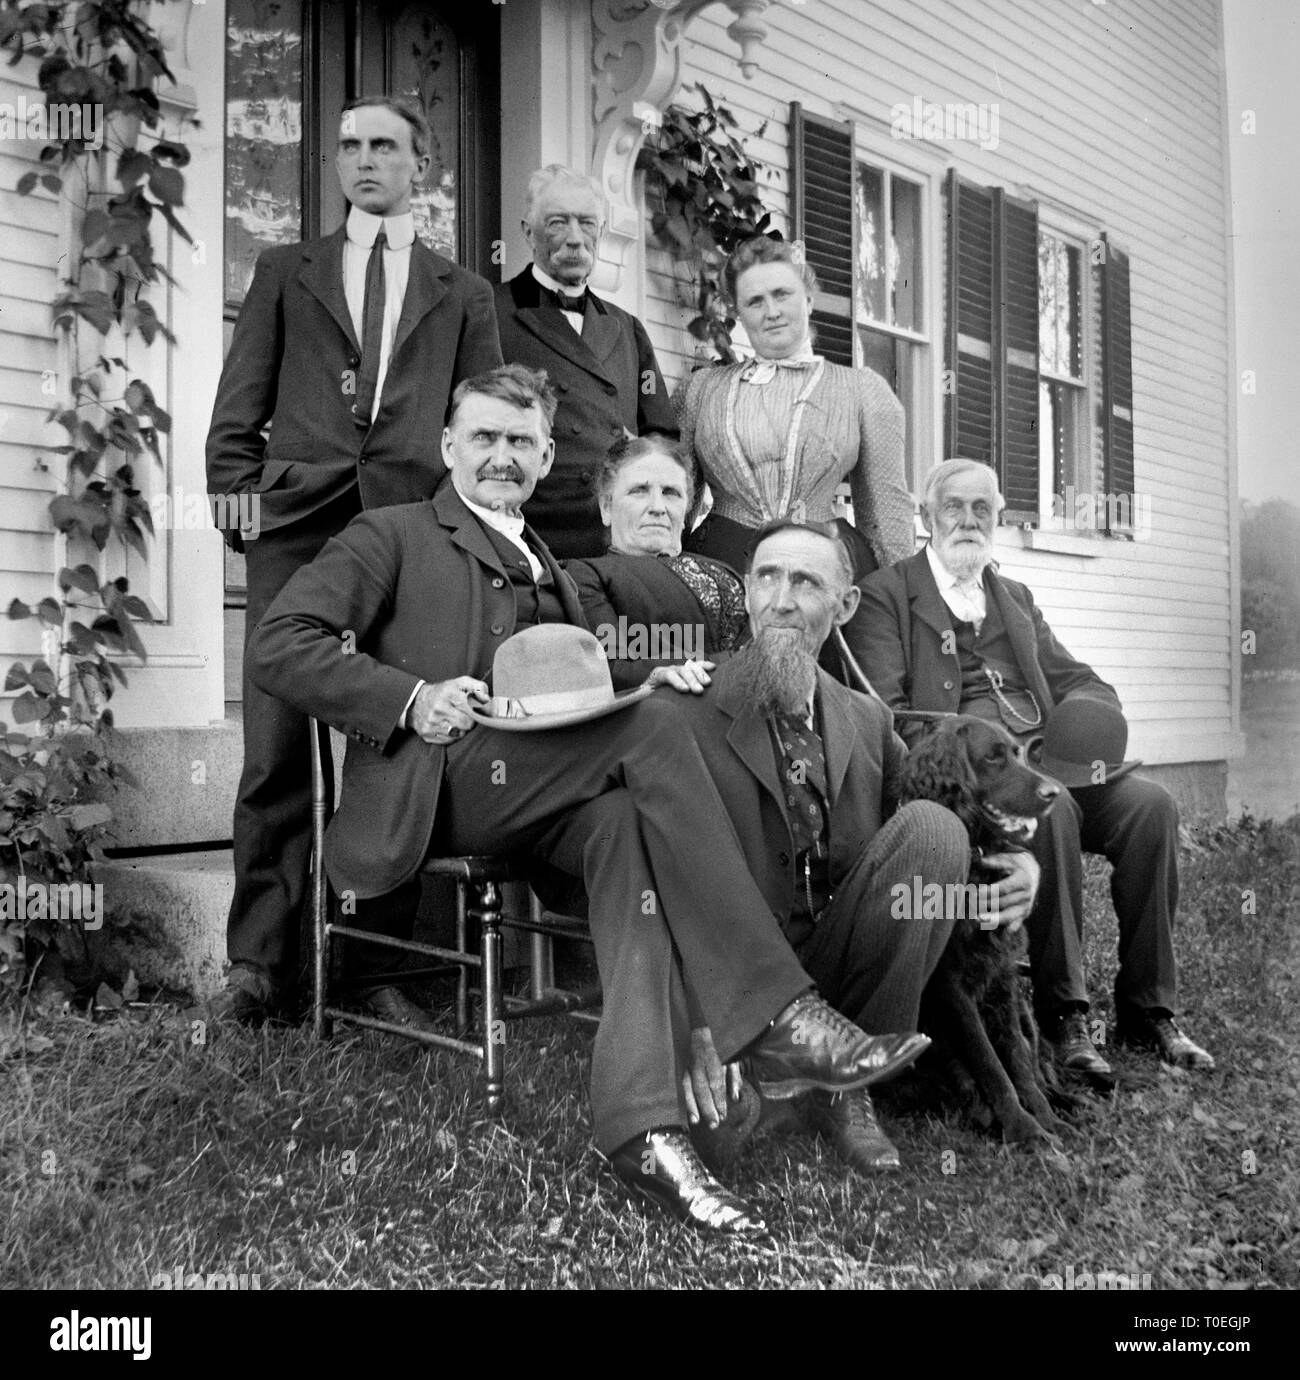 The family elders gather outside of the house for a group portrait, ca. 1915. Stock Photo